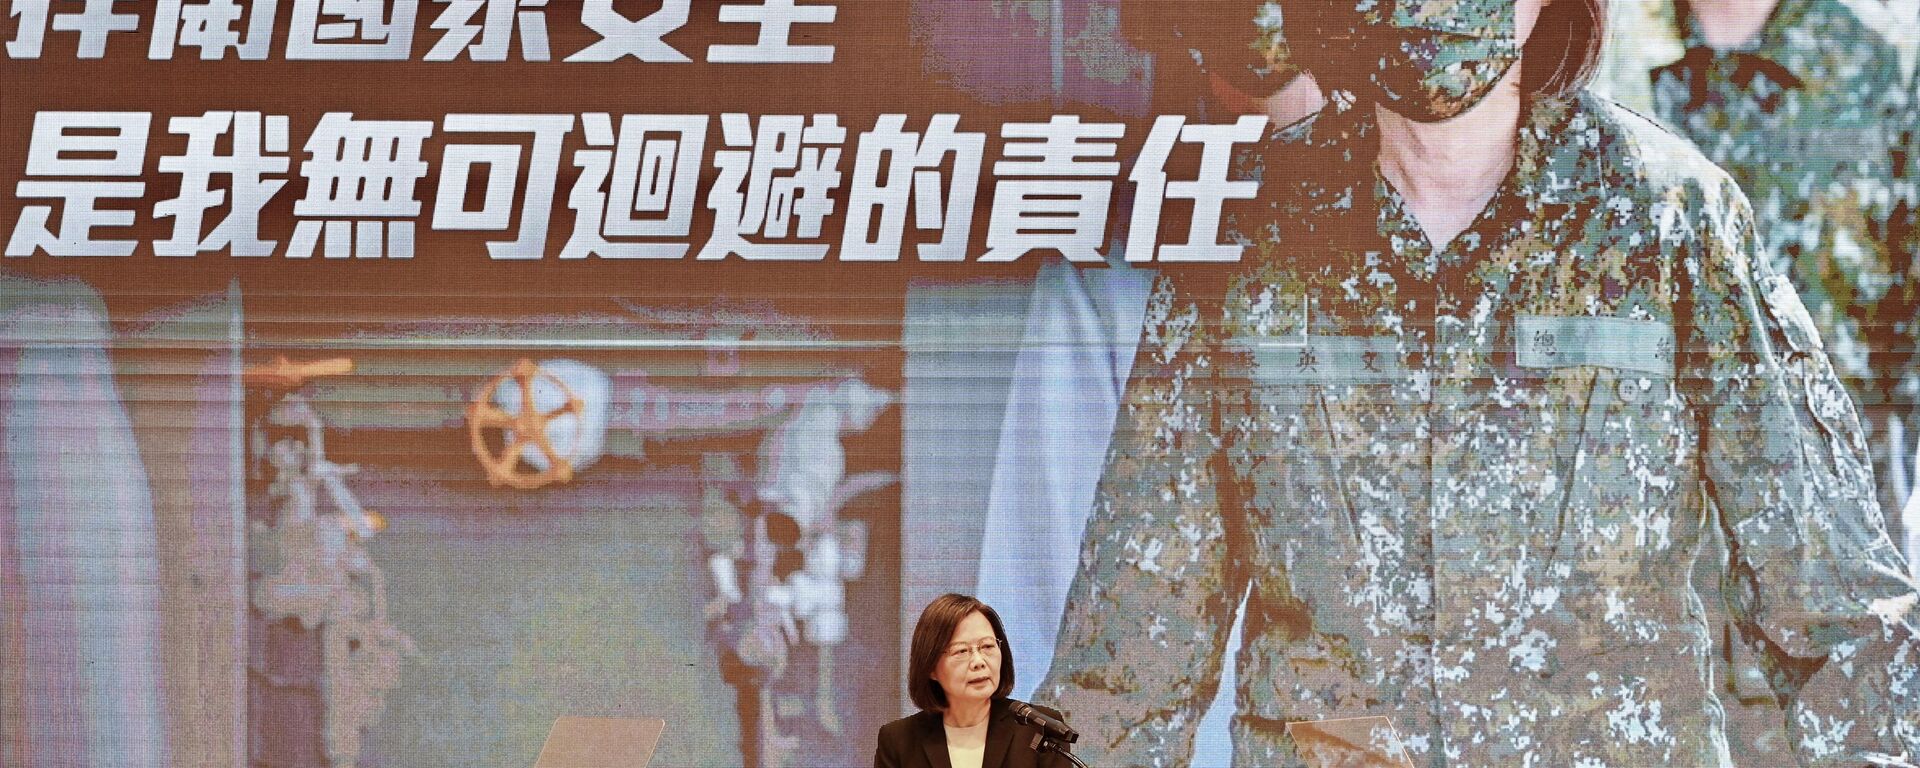 Taiwan's President Tsai Ing-wen speaks during a press conference at the presidential office in Taipei on December 27, 2022. - Taiwan's President Tsai Ing-wen announced on December 27, 2022 an extension in mandatory military service from four months to one year, saying the island needs to prepare for the increasing threat from China.  - Sputnik International, 1920, 27.12.2022